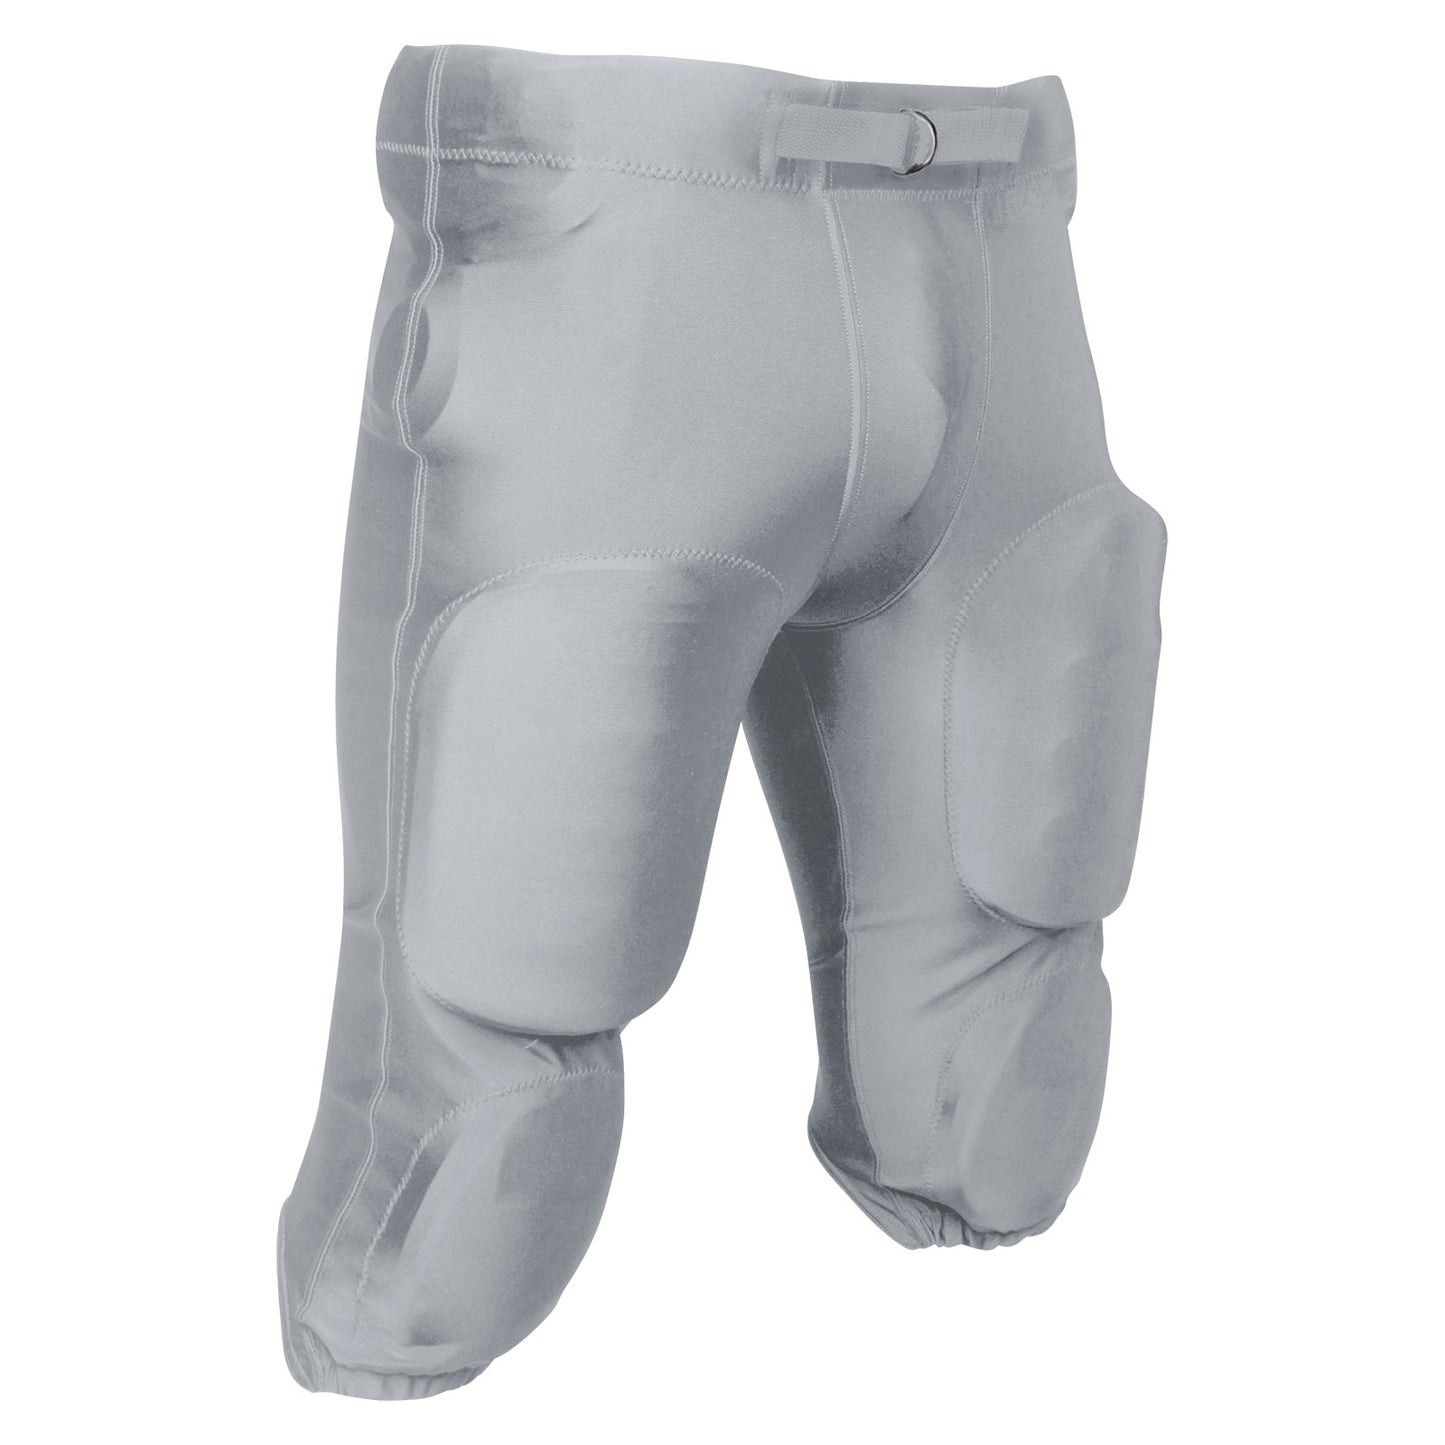 Traditional Football Pant With Pad Pockets SILVER BODY